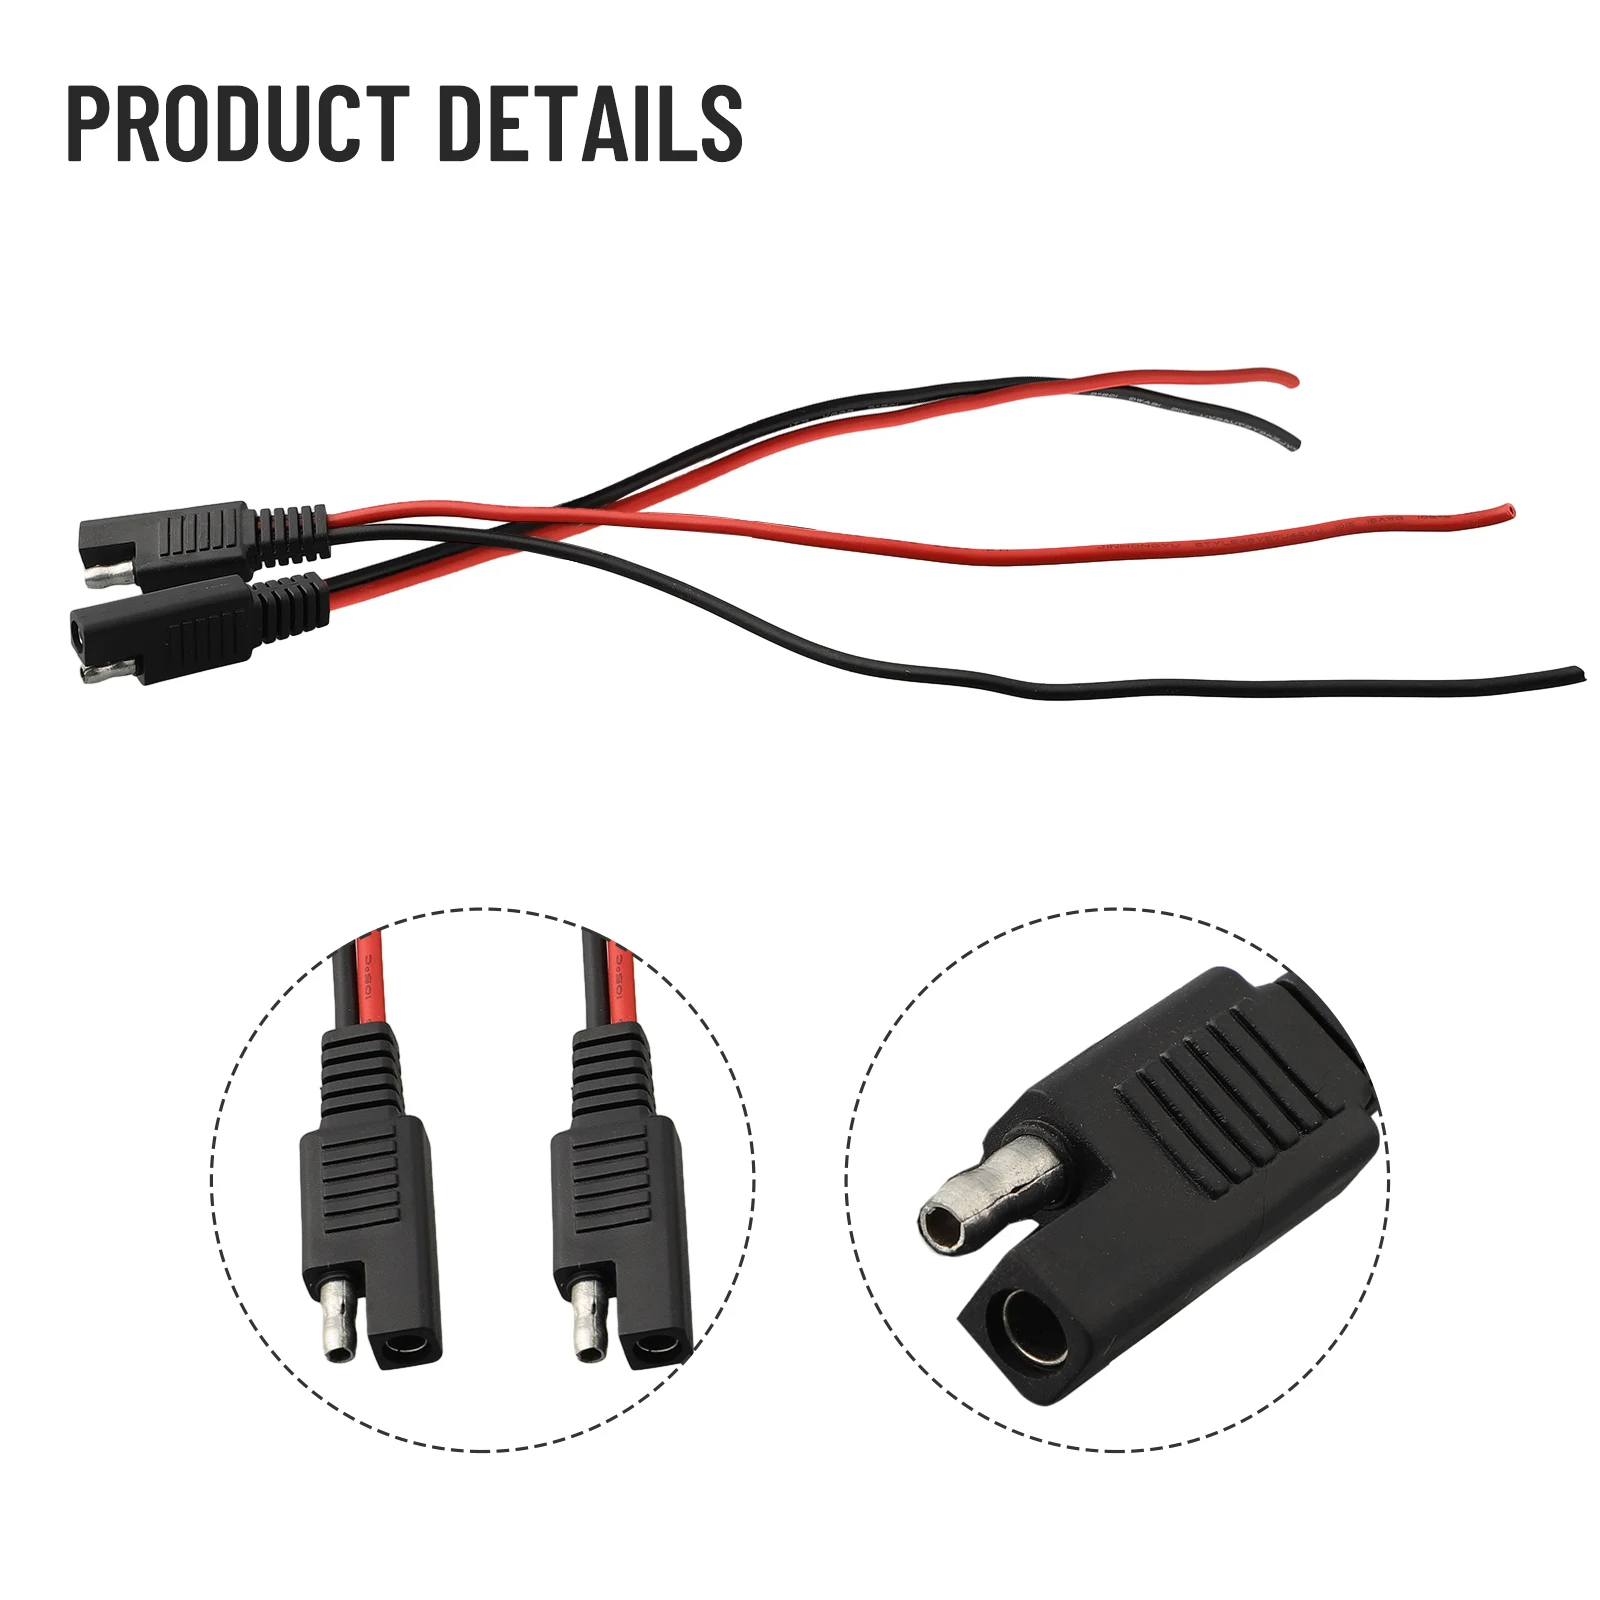 

1Pair SAE Extension Cable 18AWG Male+Female Connector 0 5Ft Length Thick and Durable Construction for Longevity